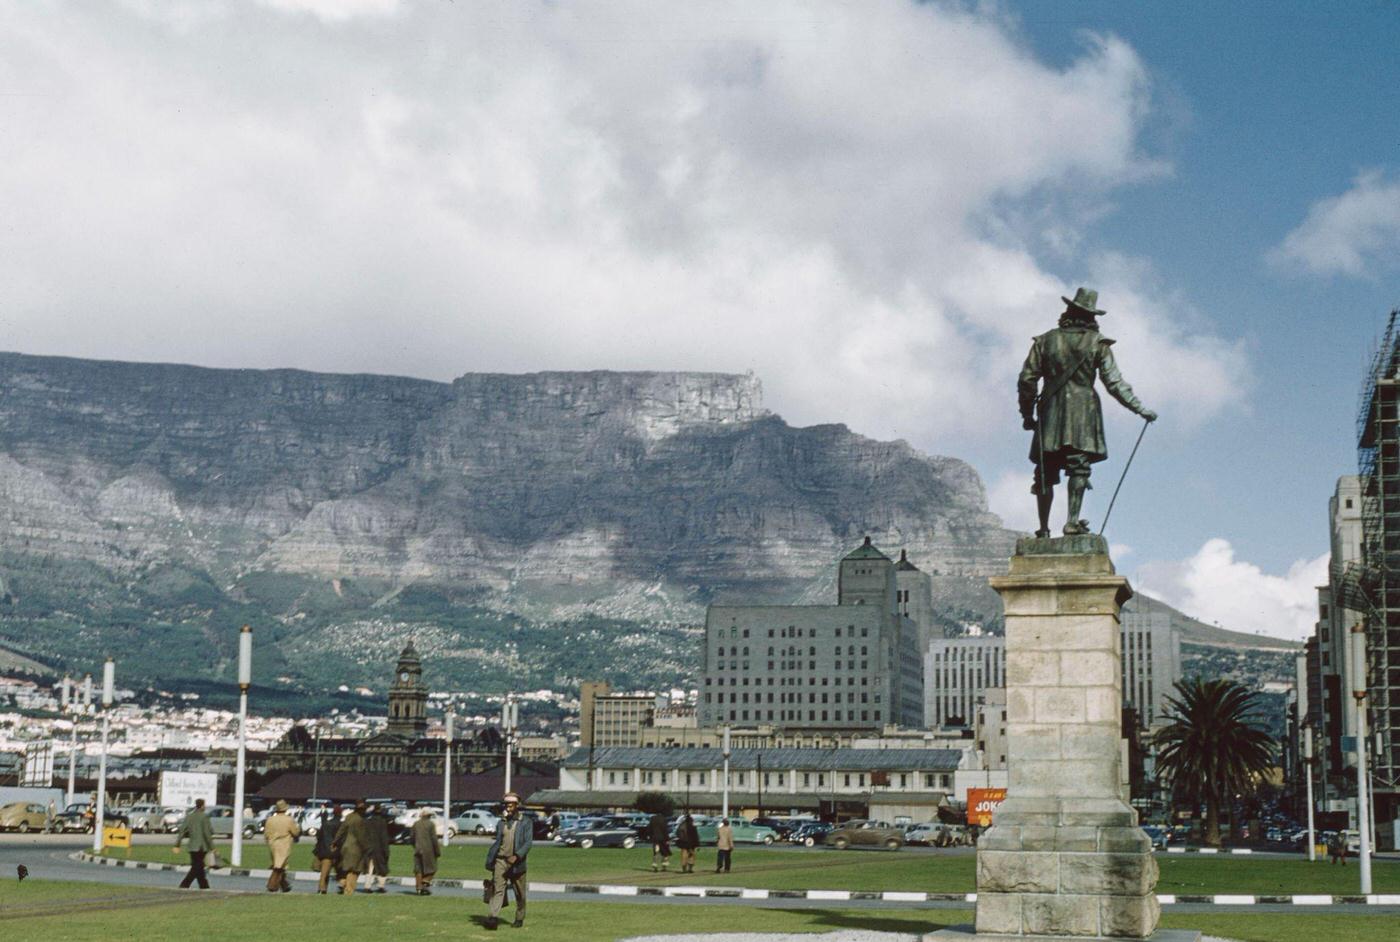 Pedestrians walk past the statue of Jan van Riebeeck at the end of Adderley Street, with Table Mountain in the background, in the center of the city of Cape Town, 1960